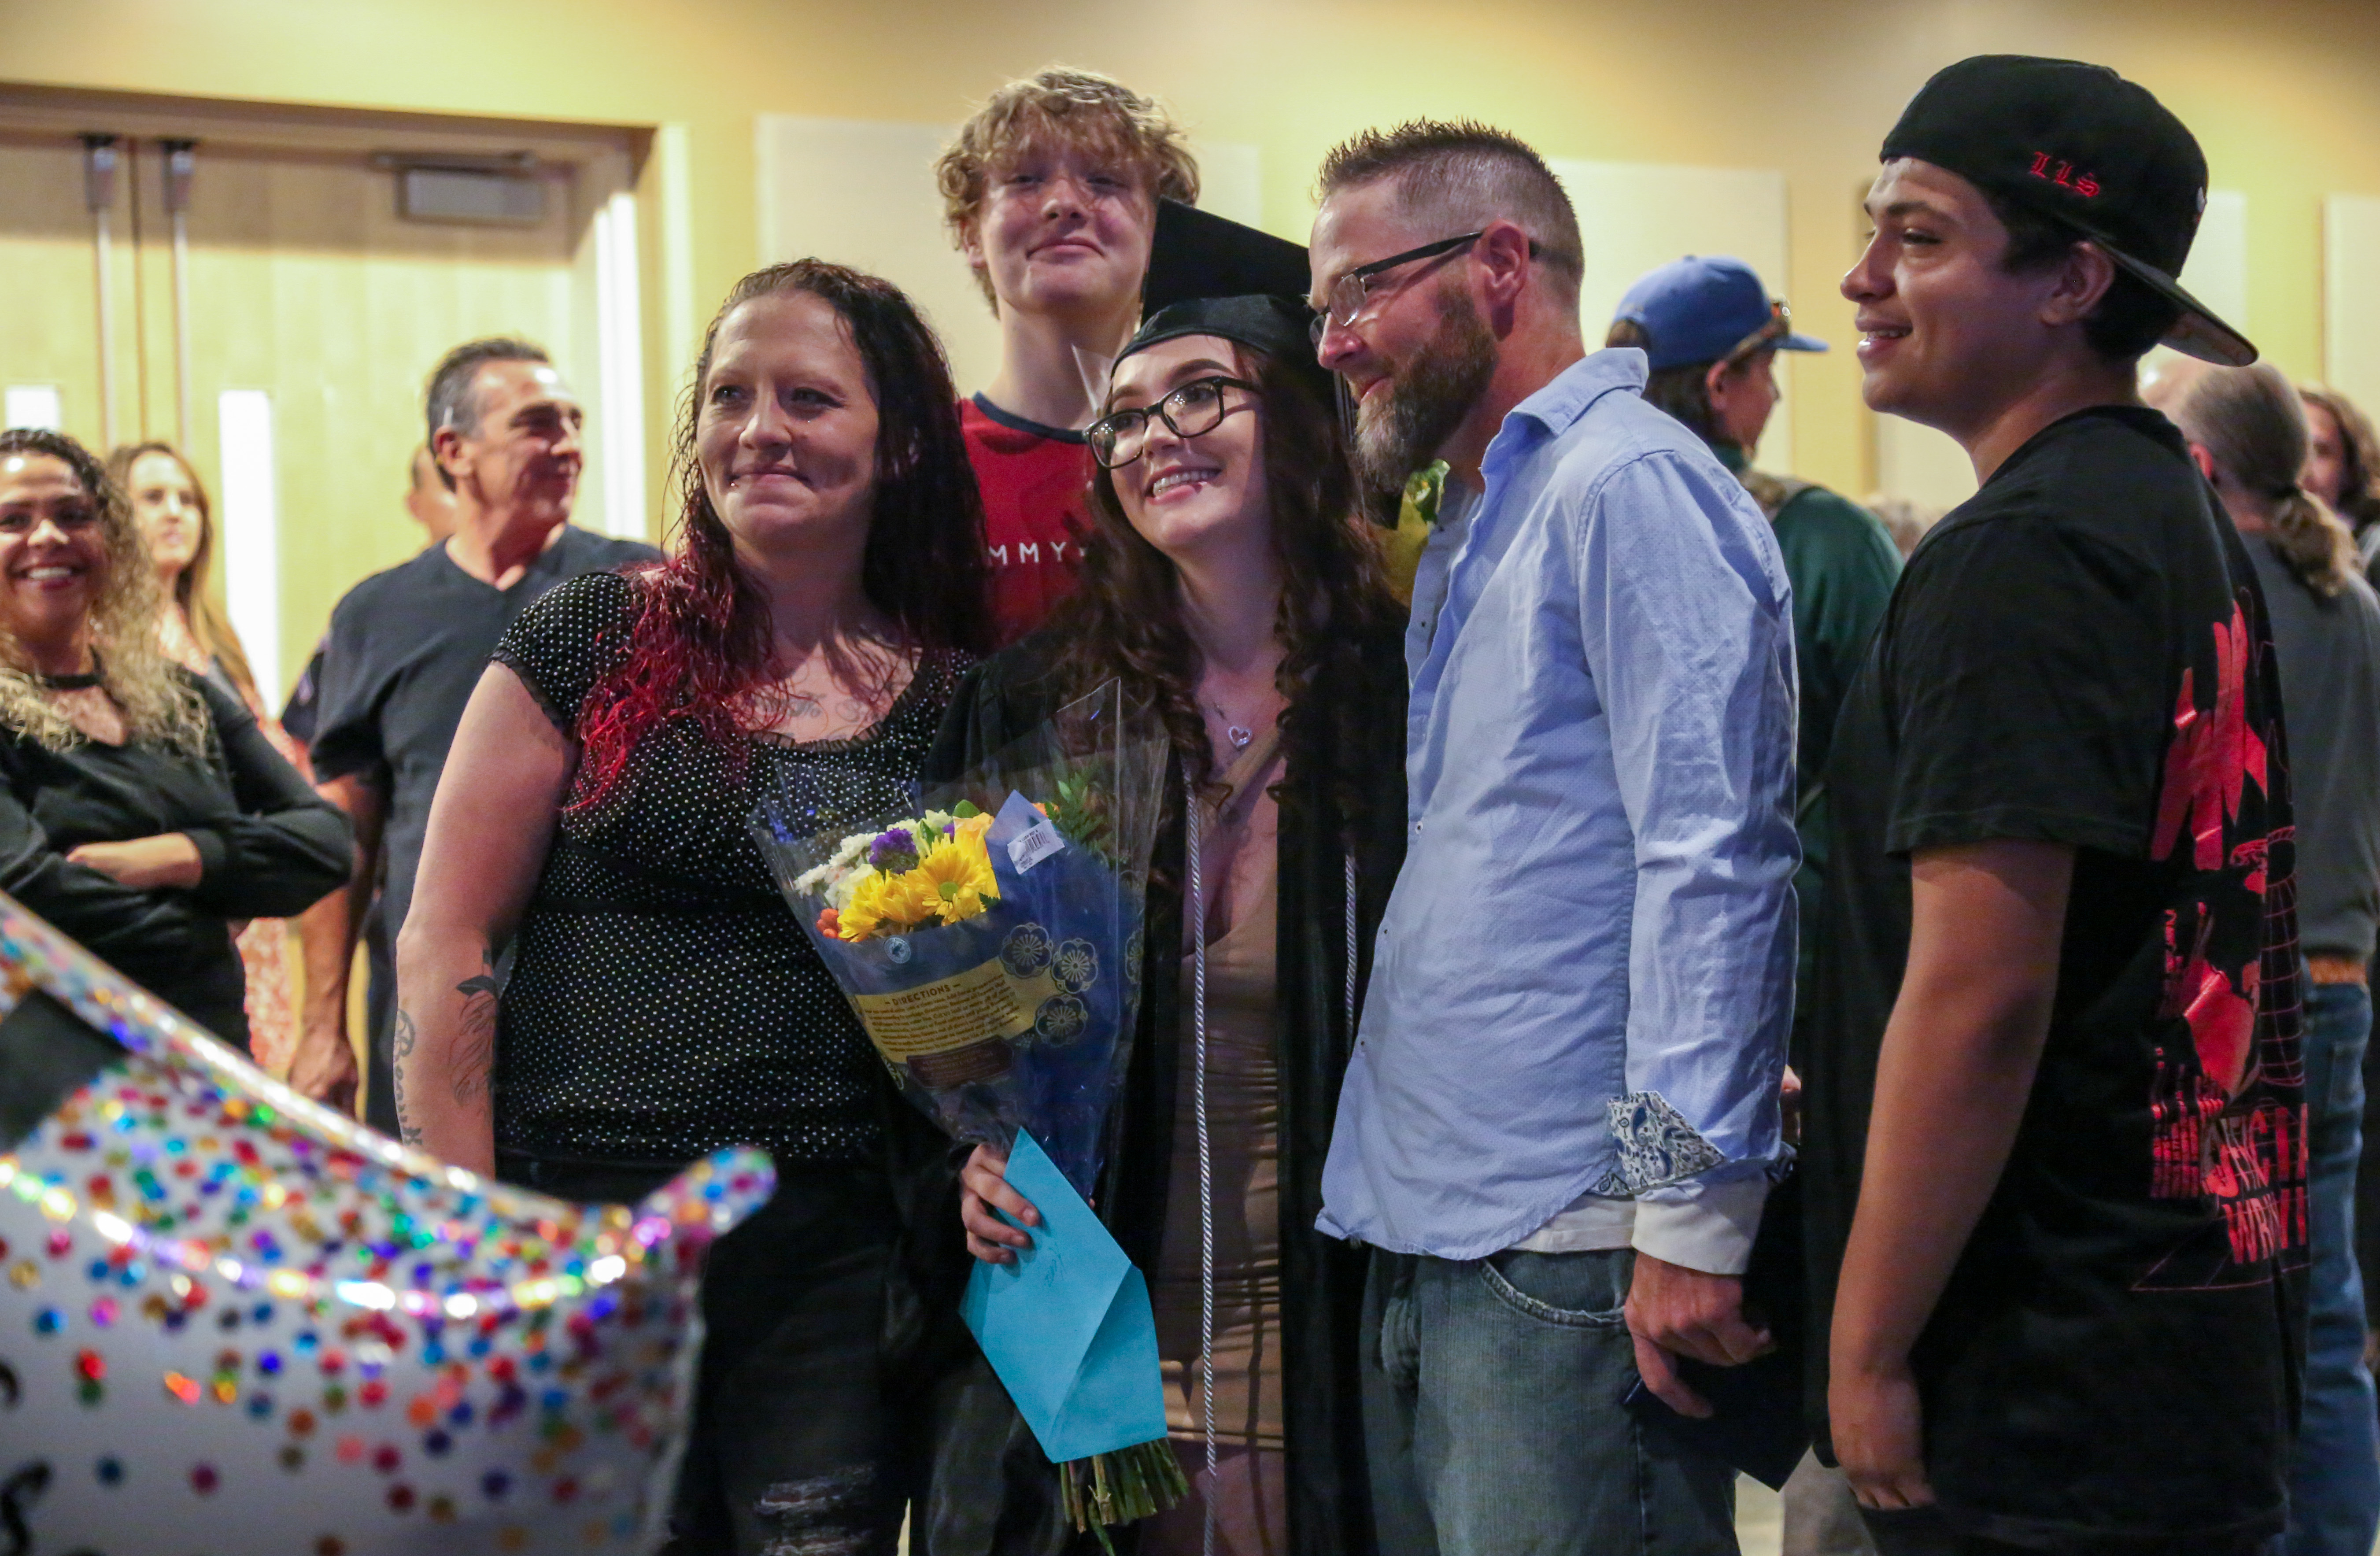 A PHS OU graduate poses with friends and family.